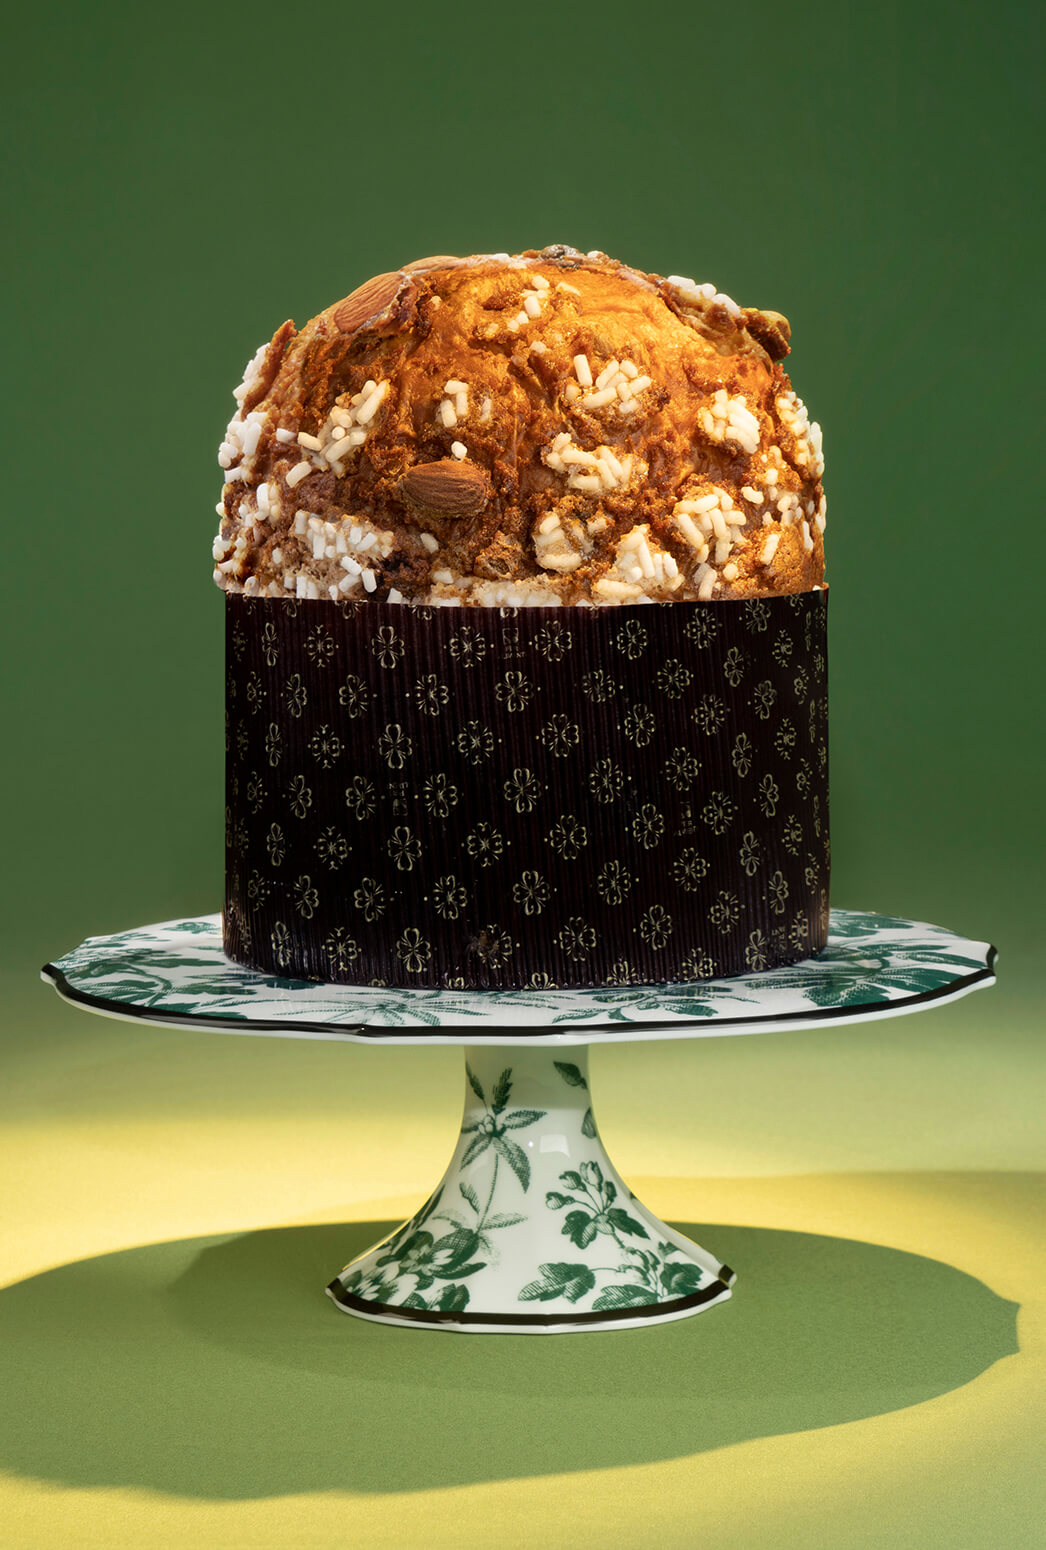 https://backend.gucciosteria.com/wp-content/uploads/sites/3/2022/11/GO-Panettone-Speciale-Beverly-Hills-1046X1550PX.jpg